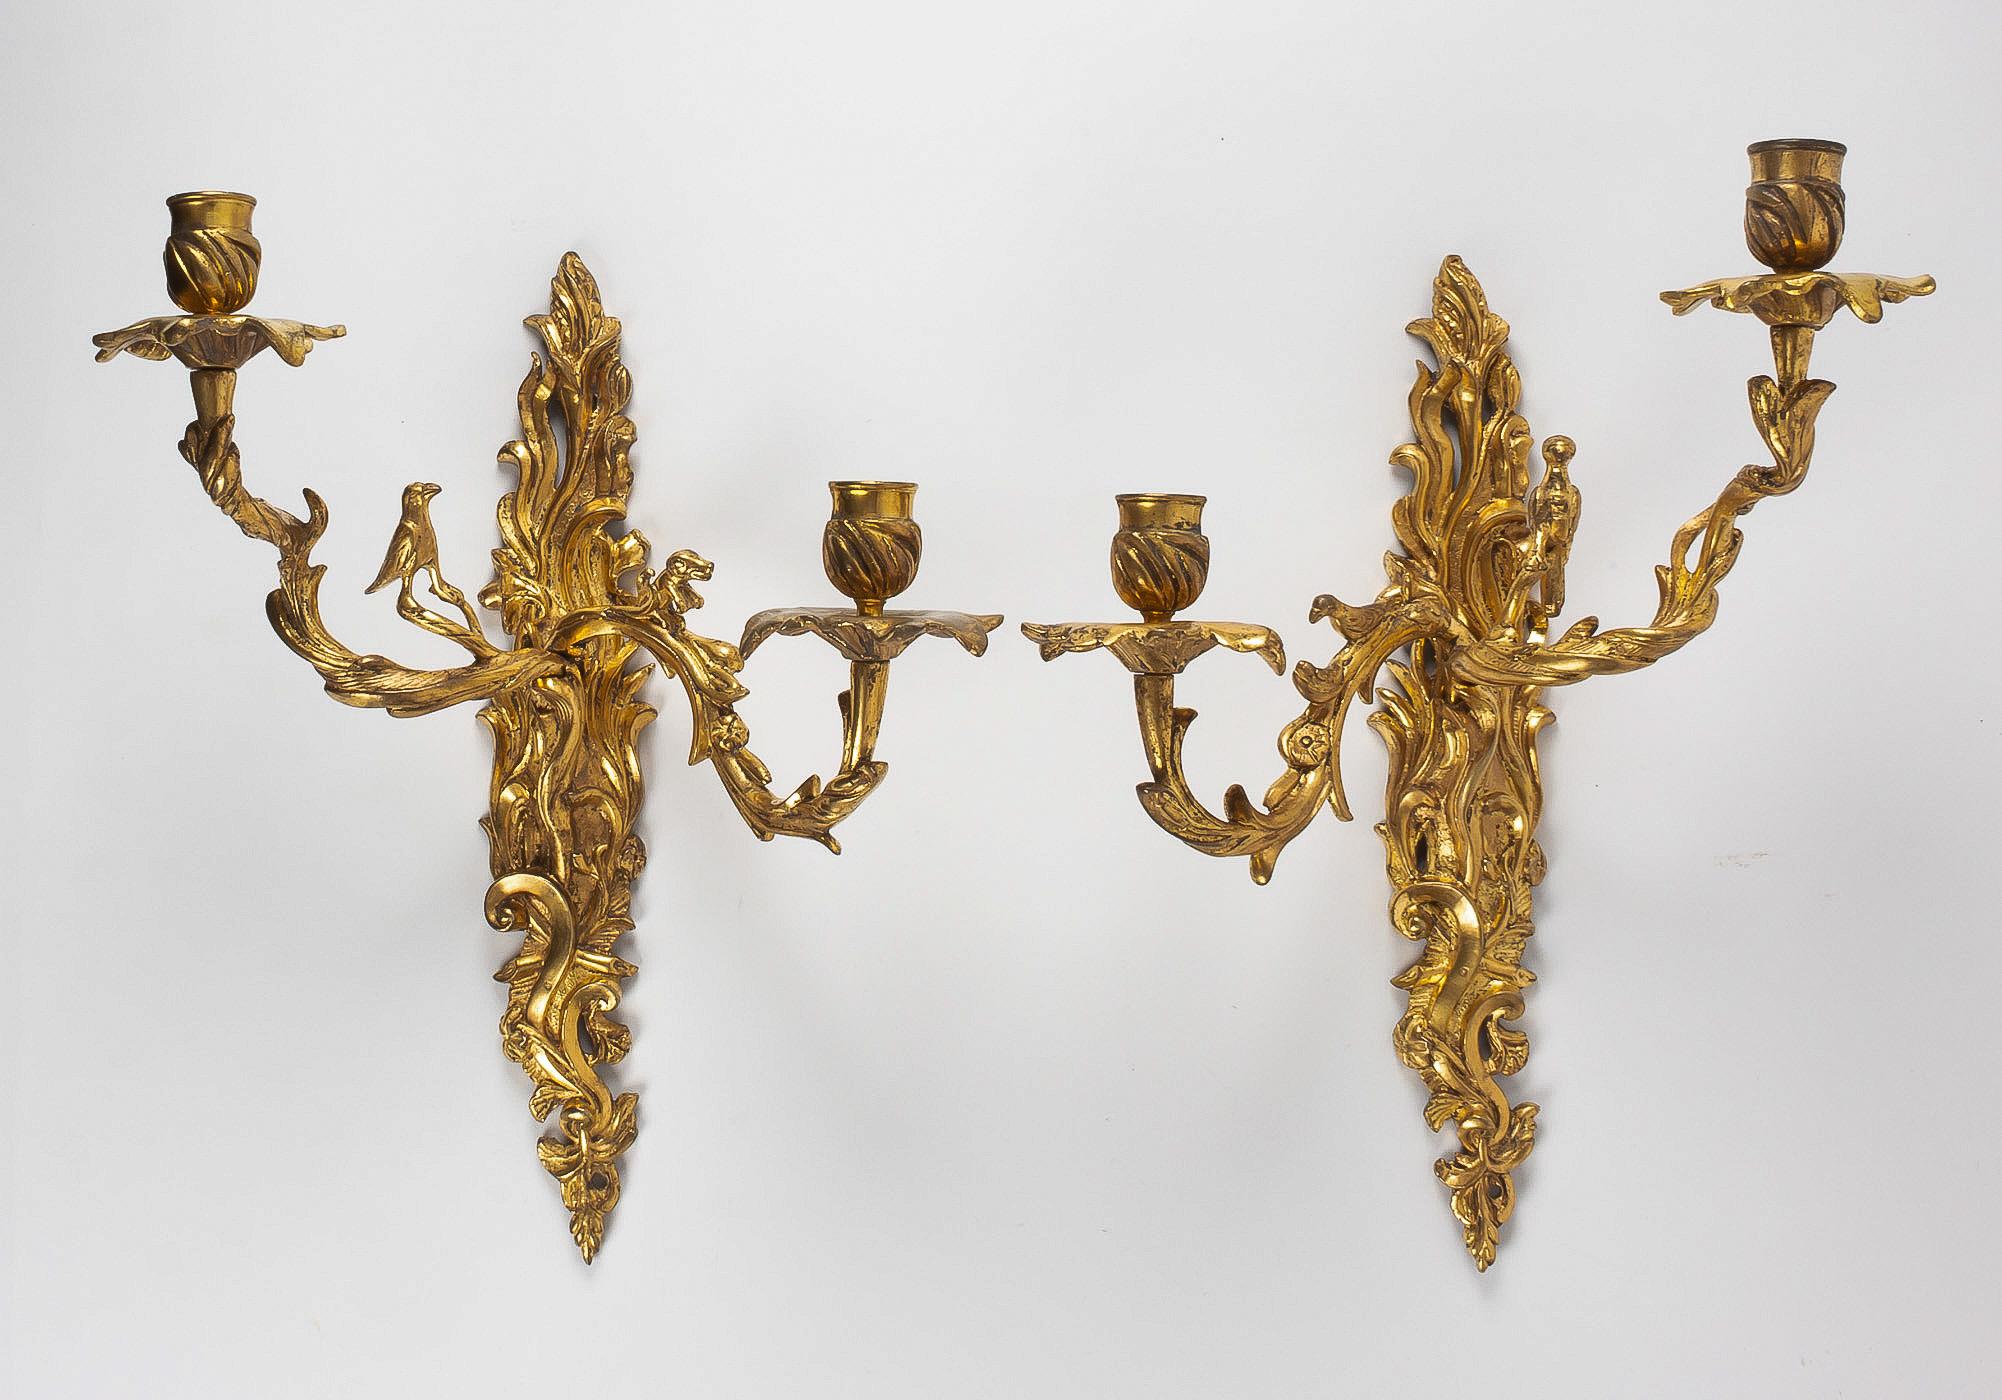 Crowned C Mark, Rare Pair of Hunting Design Ormolu Louis XV Period Sconces For Sale 13